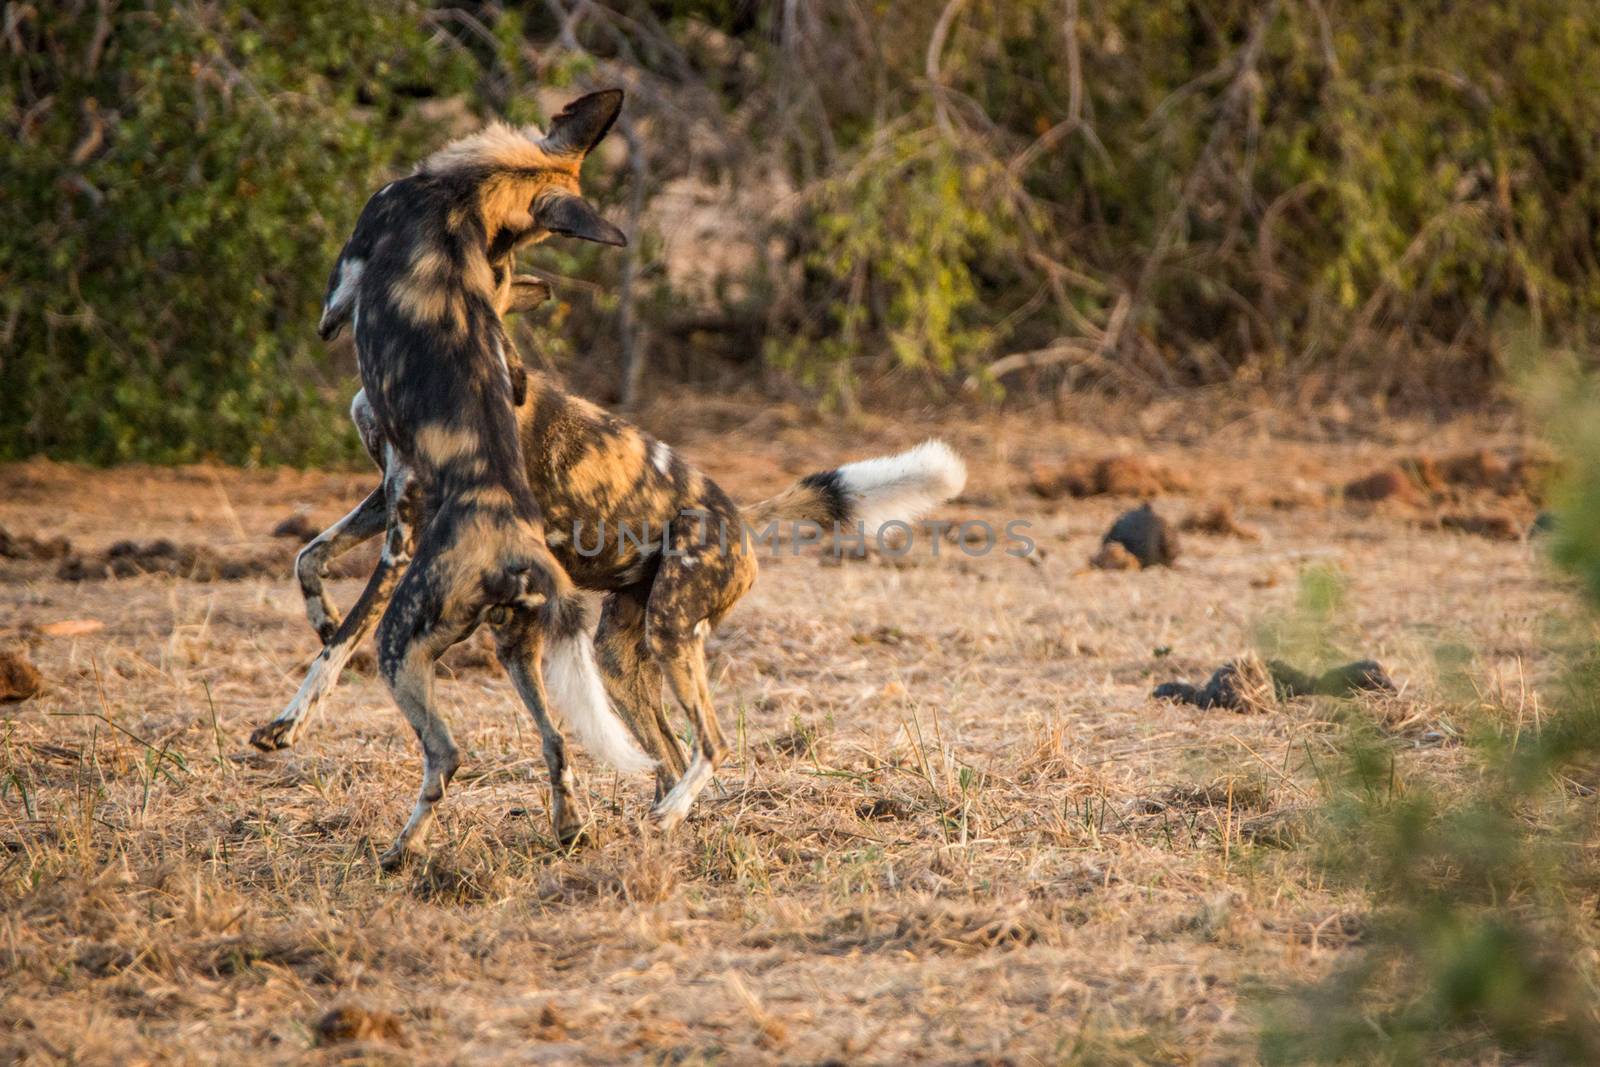 African wild dogs playing together. by Simoneemanphotography